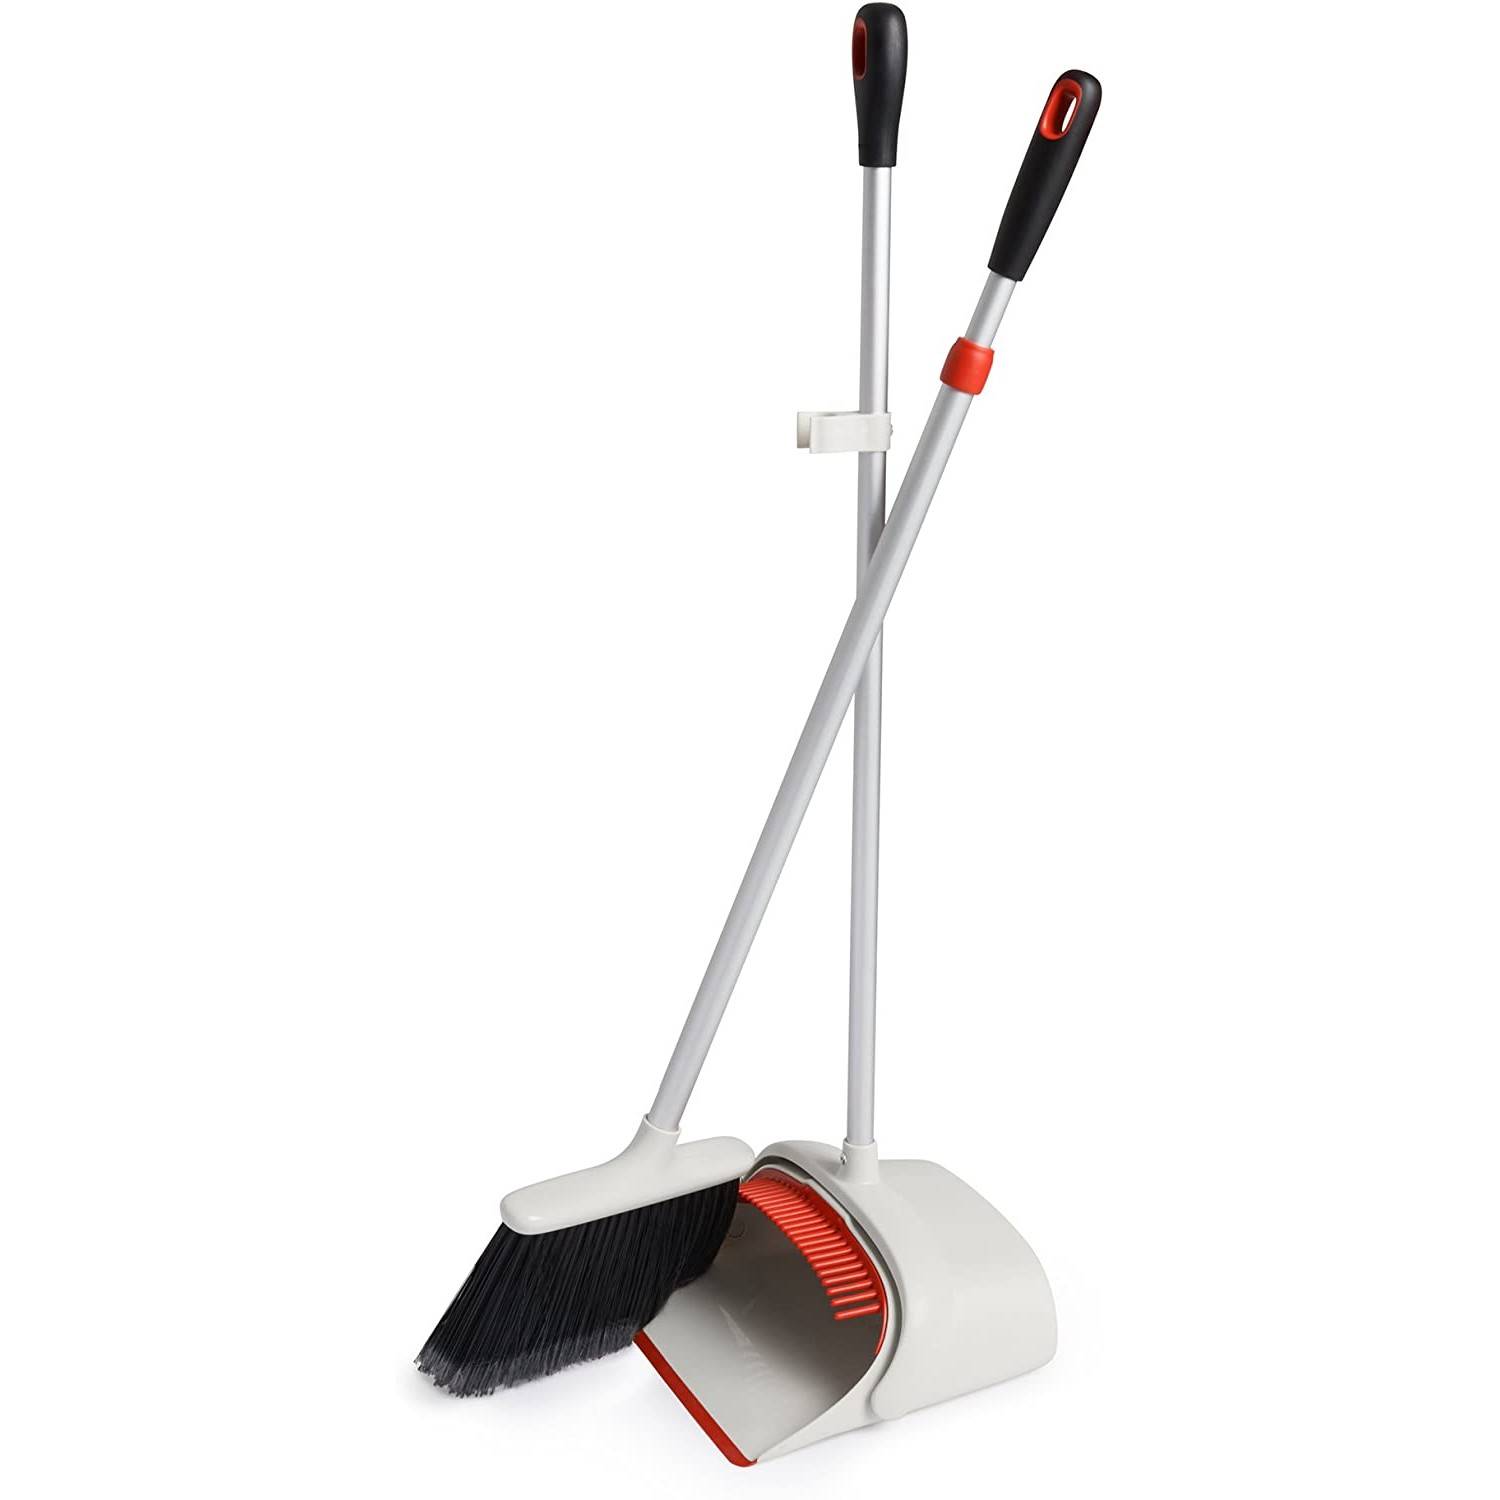 To Buy Or Not To Buy: OXO Good Grips Compact Dustpan and Brush Set